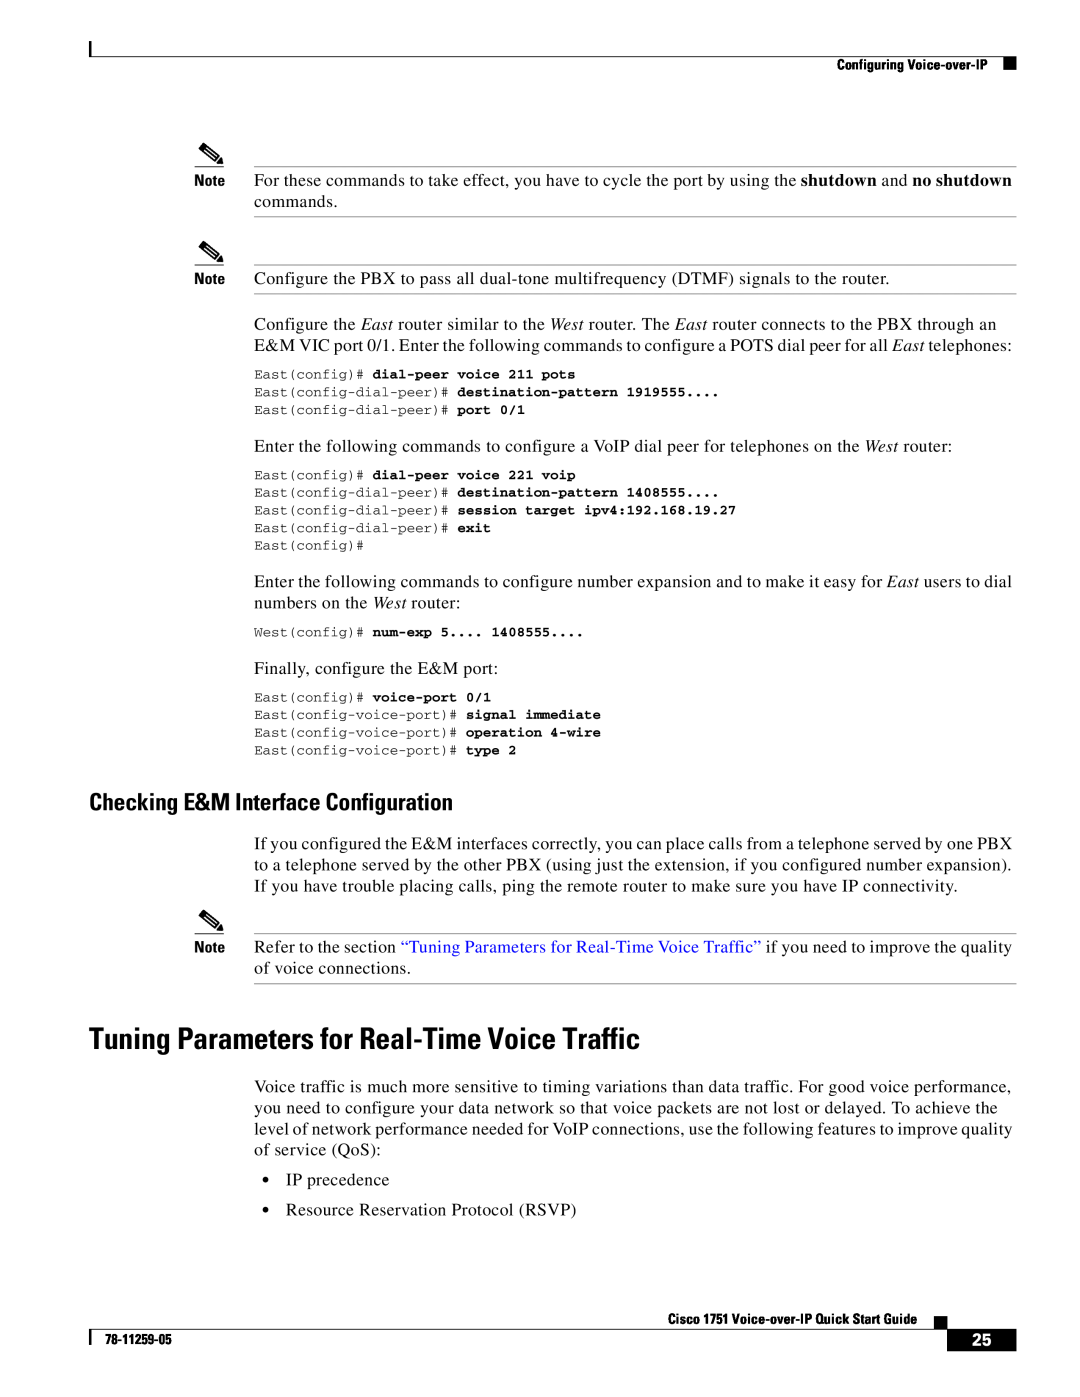 Cisco Systems CISCO1751 quick start Tuning Parameters for Real-Time Voice Traffic, Checking E&M Interface Configuration 